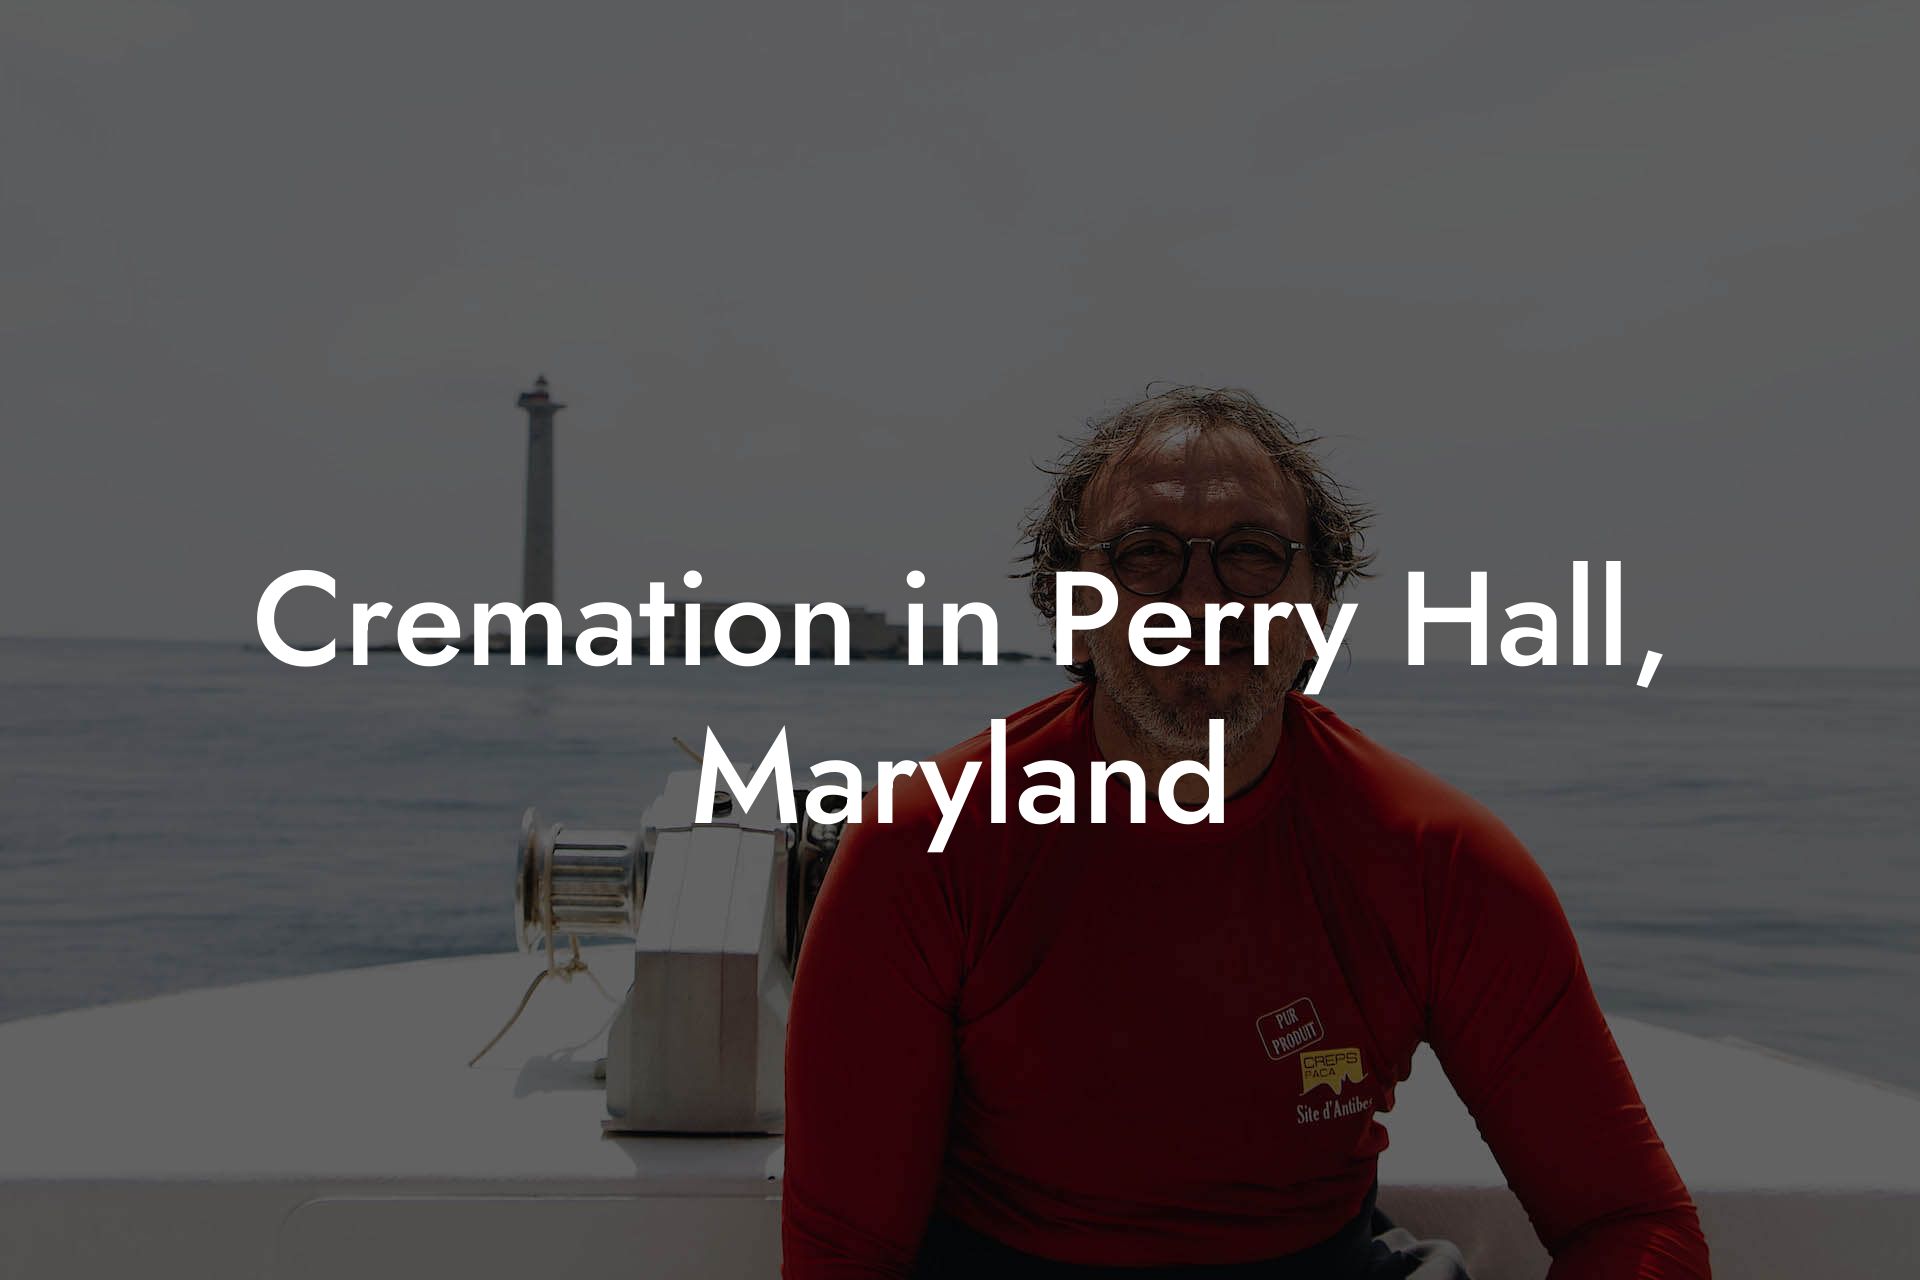 Cremation in Perry Hall, Maryland